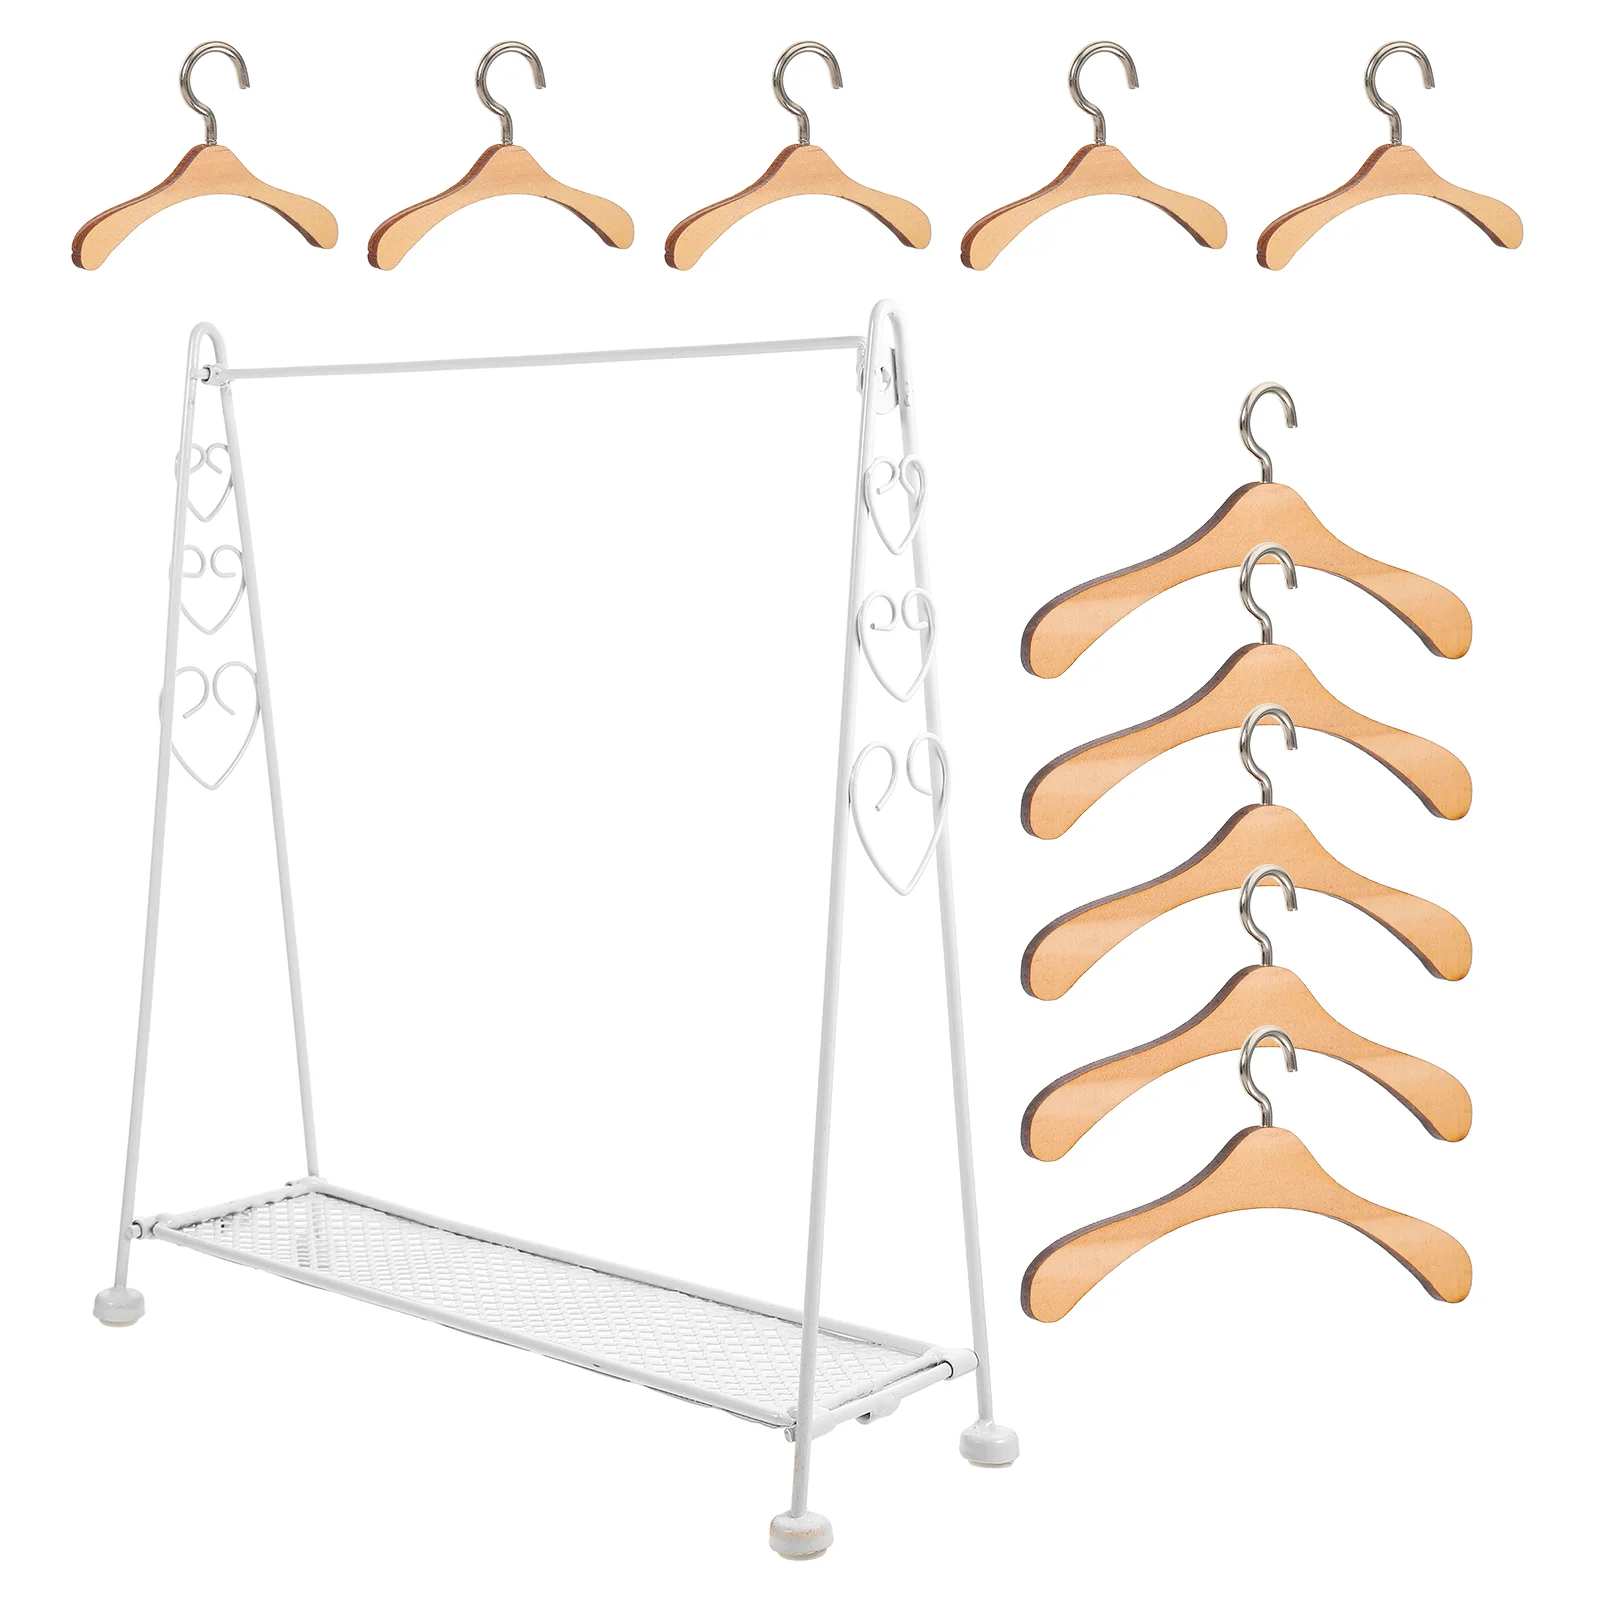 Doll Garment Rack Wood Hangers Miniature Clothes Rack Doll Apparel Clothes Hangers Dollhouse Dress Outfit Wardrobe high quality wood four layer earring jewelry display stand for female pendent ring bracelet jewellery showcase rack organizers